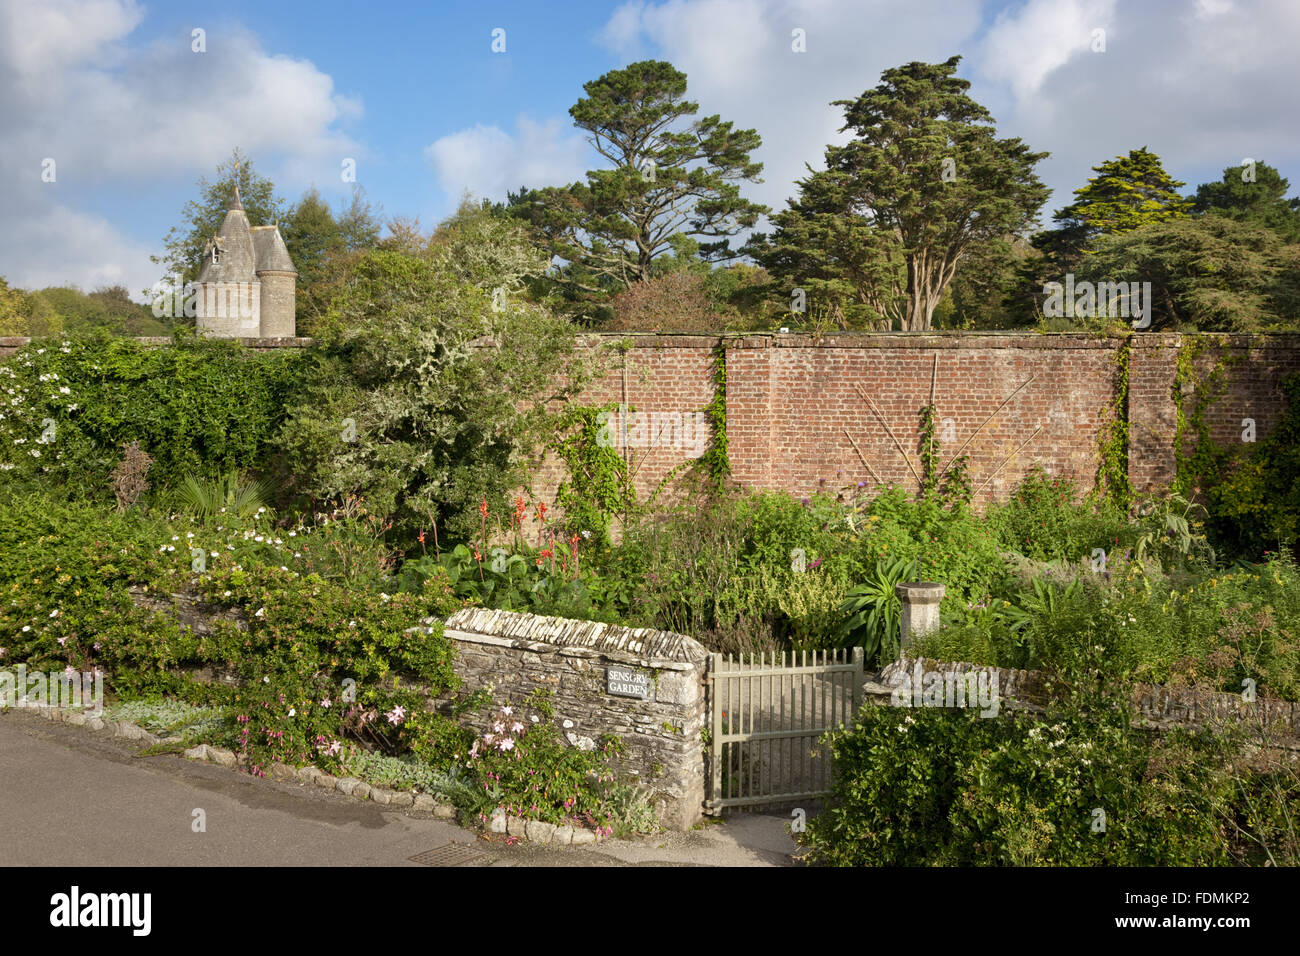 The Sensory Garden with the Water Tower at Trelissick Garden, Cornwall. Stock Photo